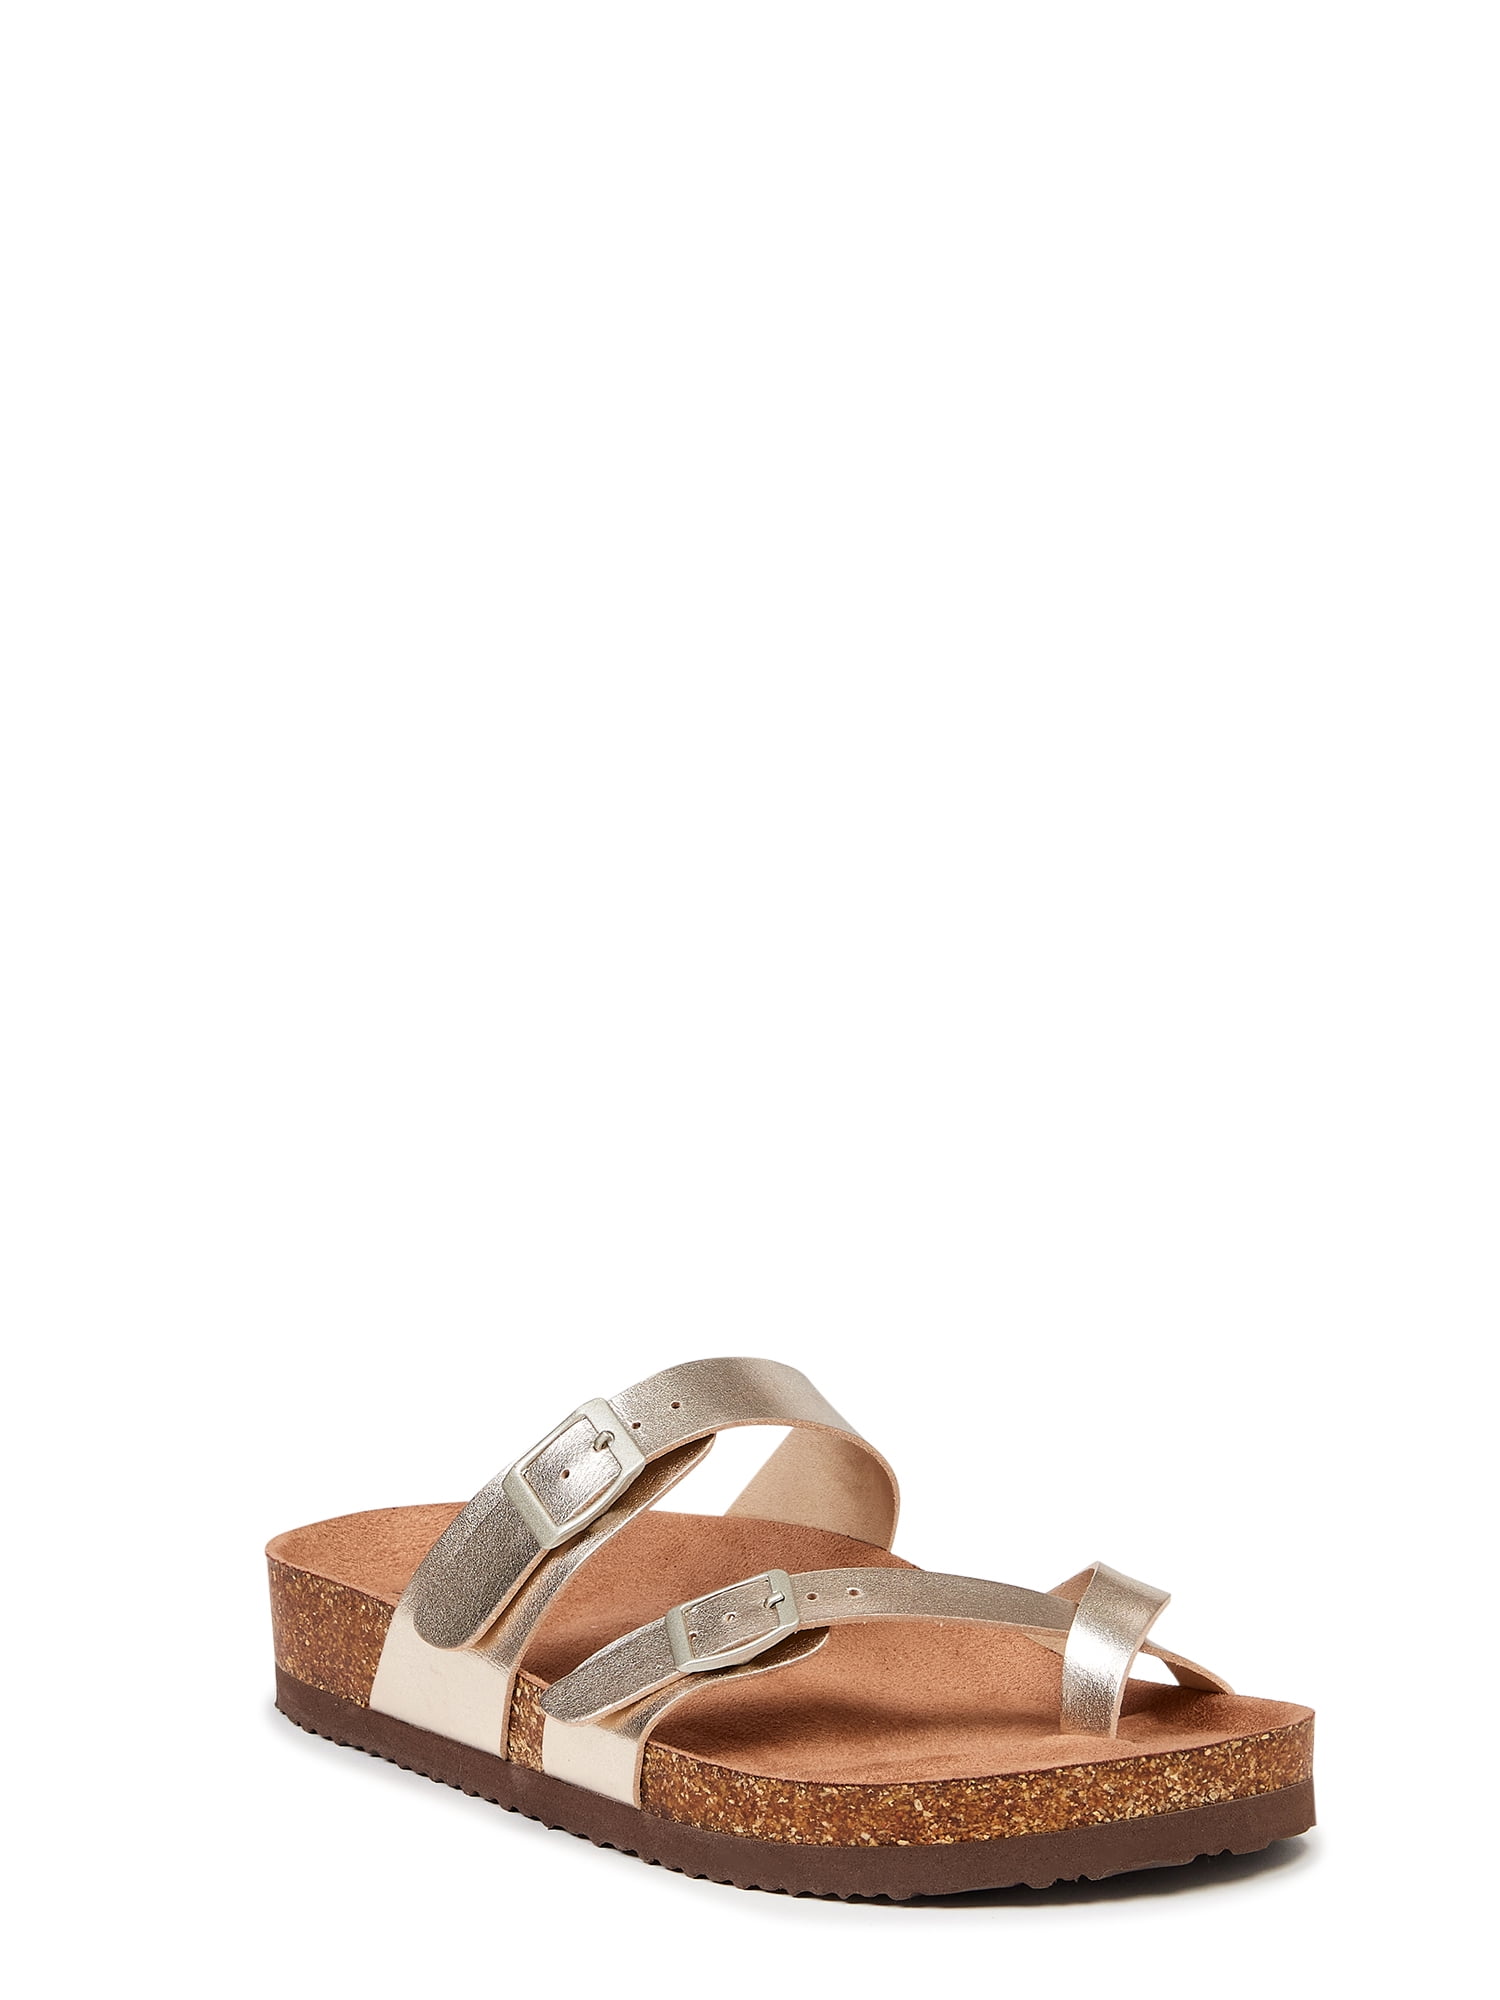 Time and Tru Women's Footbed Thong Sandals - Walmart.com